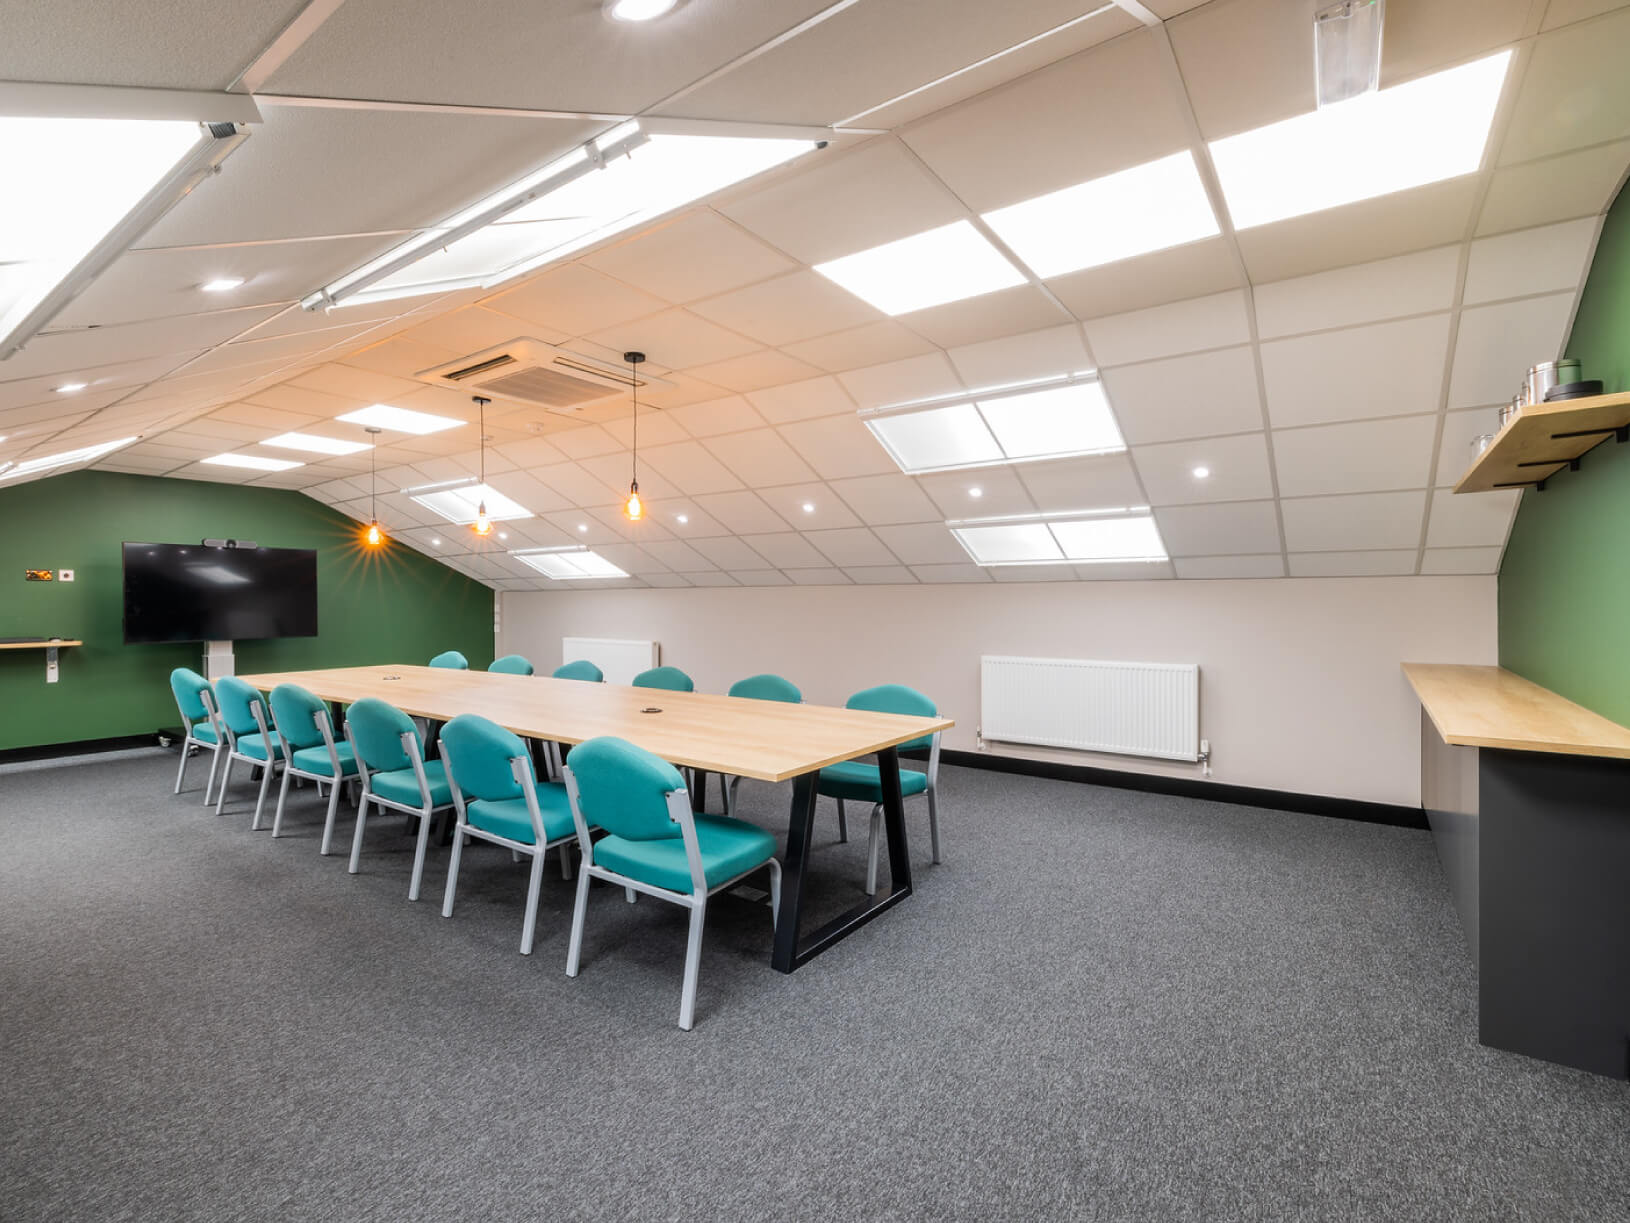 A conference room in The Enterprise Village with a green table and chairs.